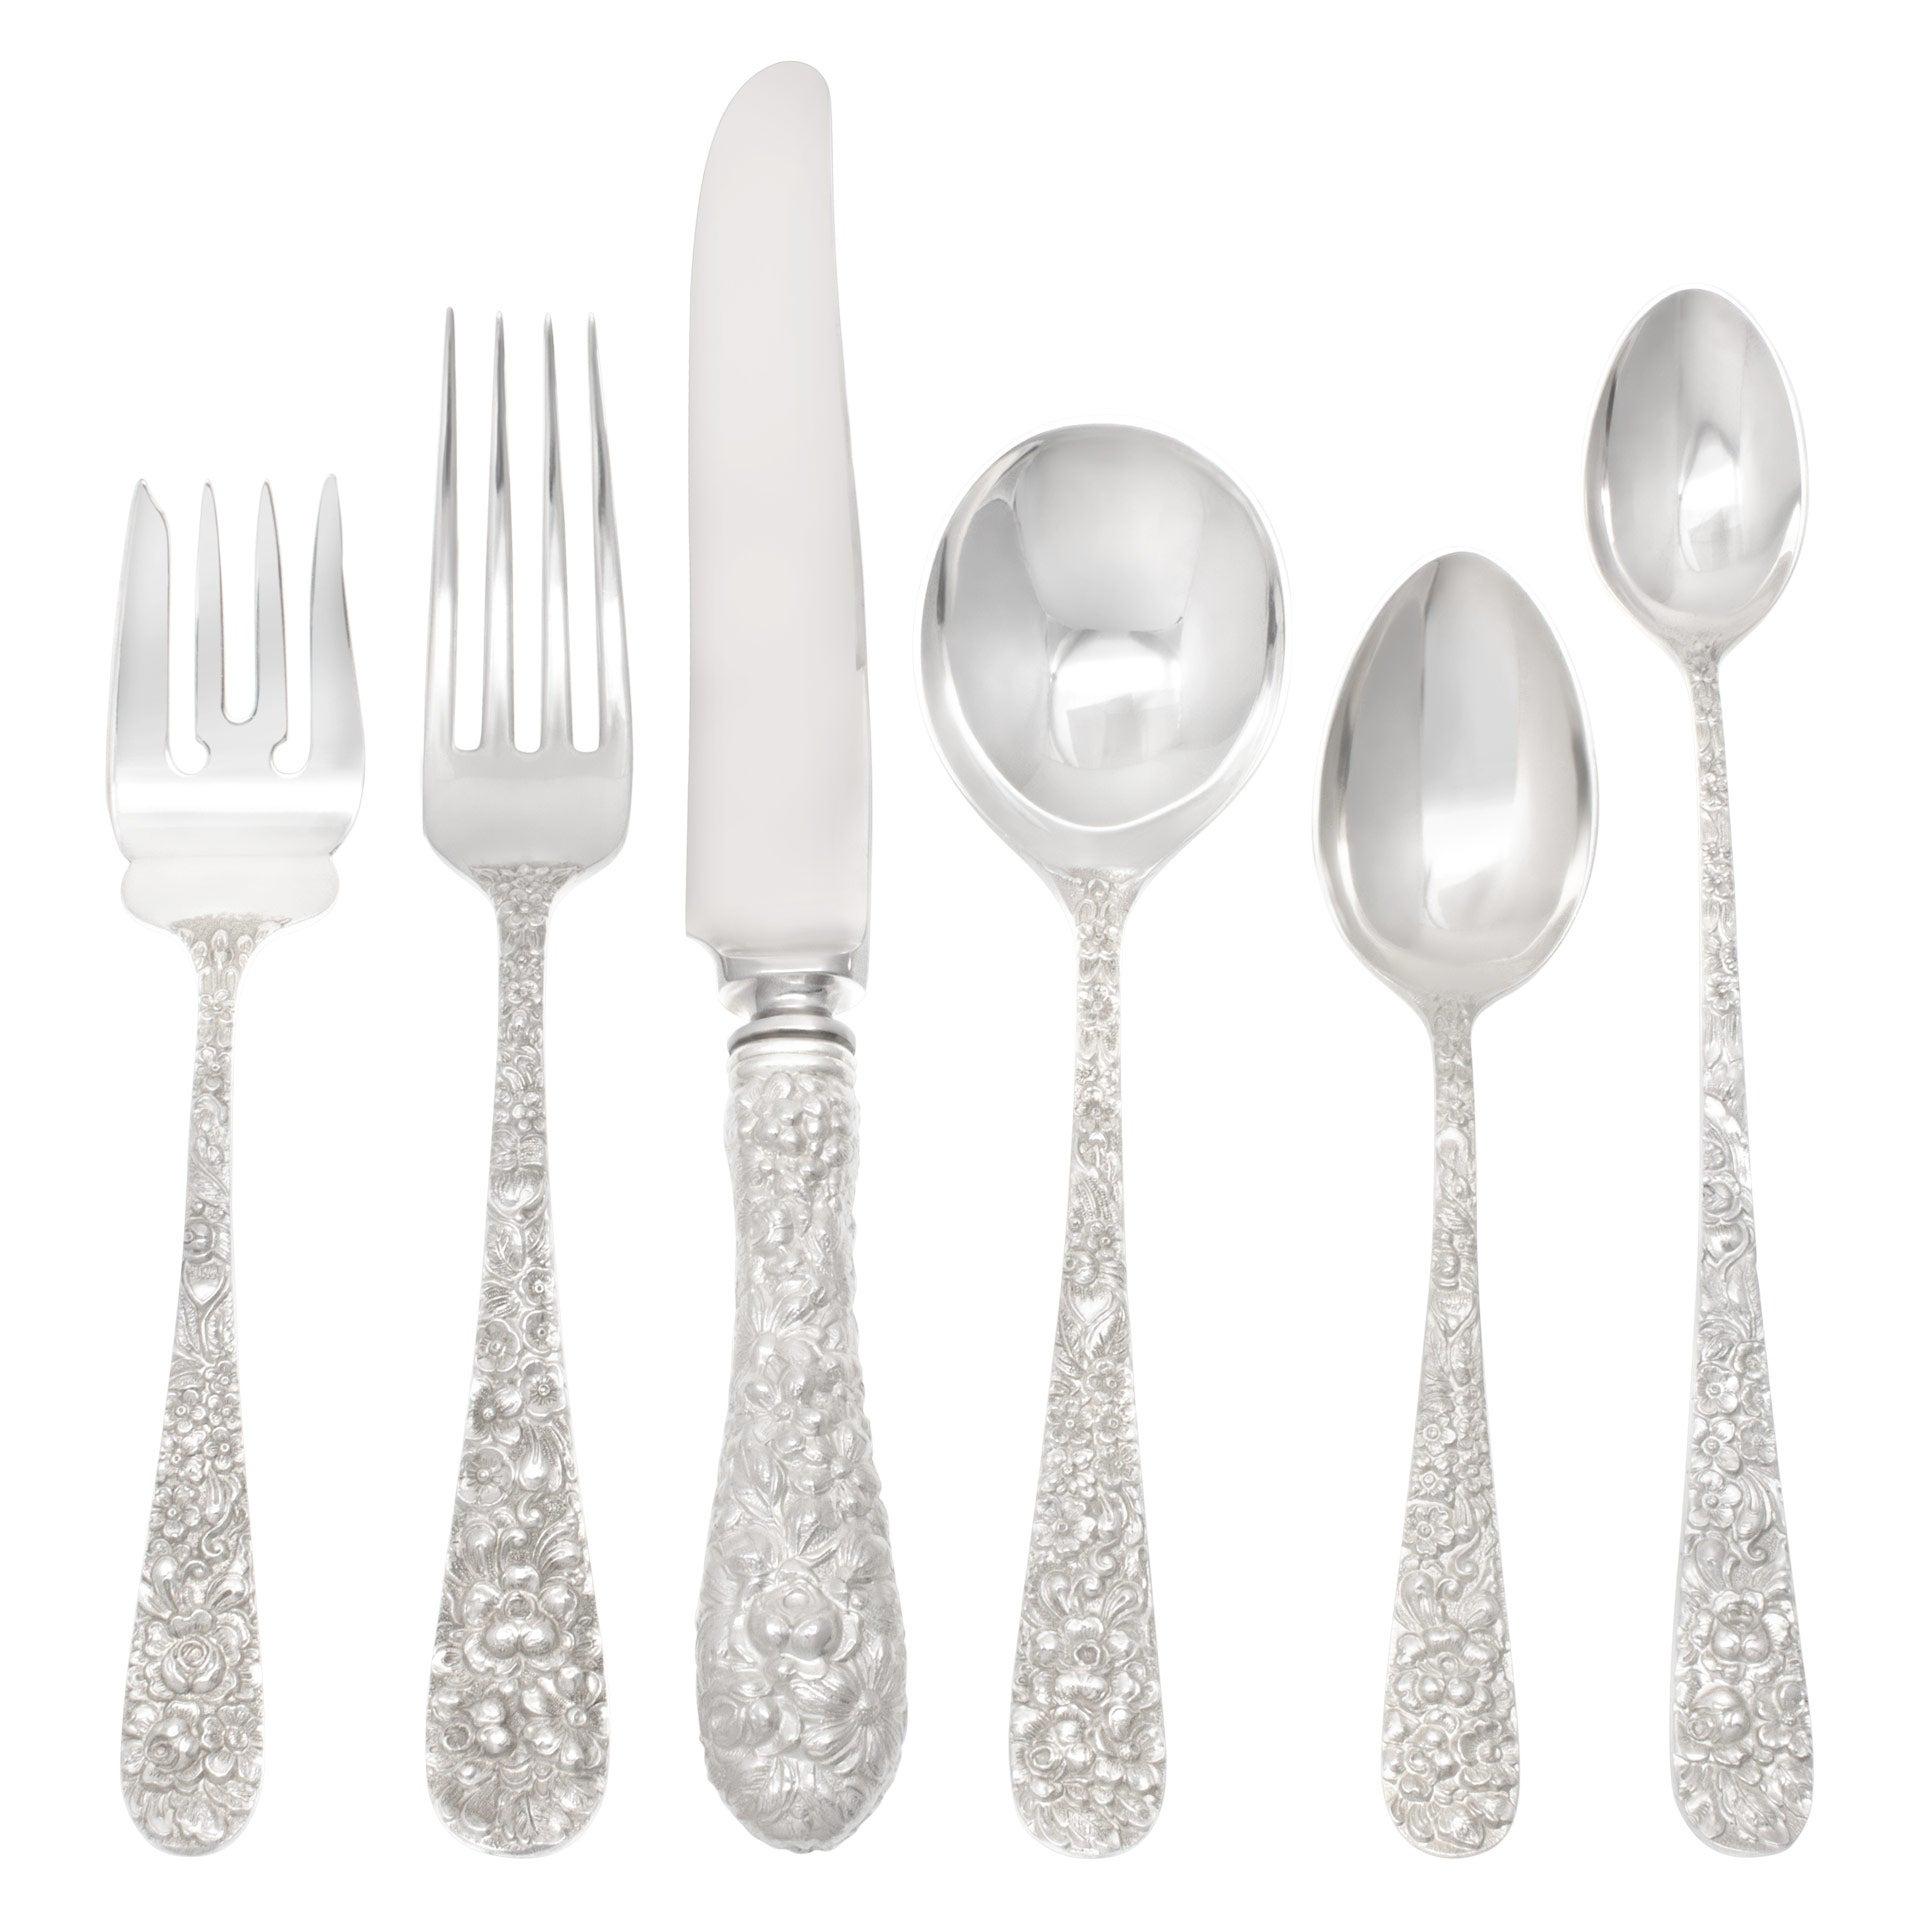 Stieff Sterling Silver Co. "Rose Repousse" Sterling Silver Flatware Set